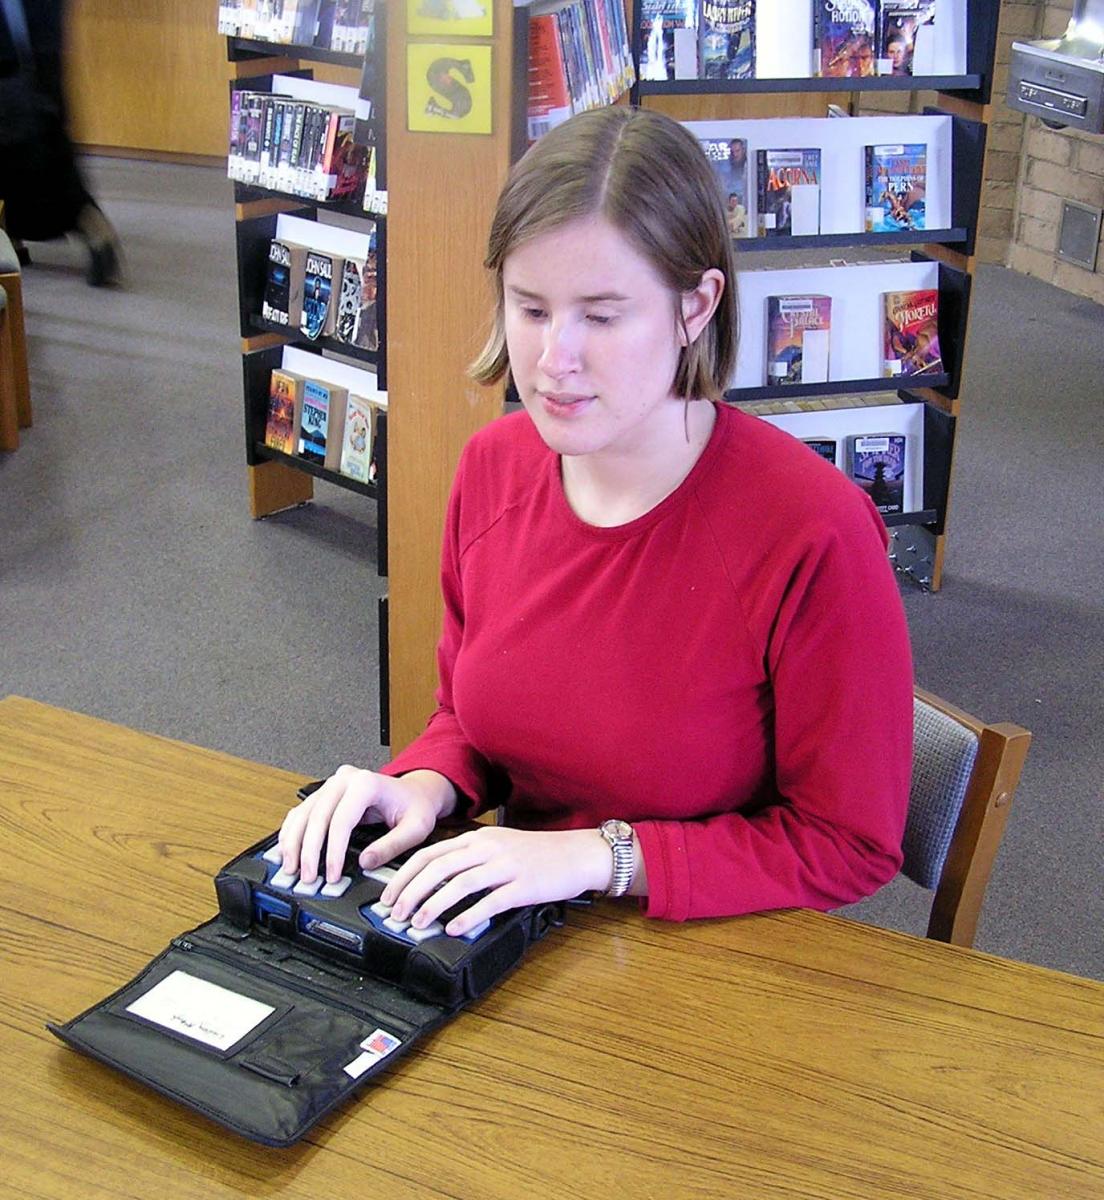 High school student using the Pac Mate in a school library.